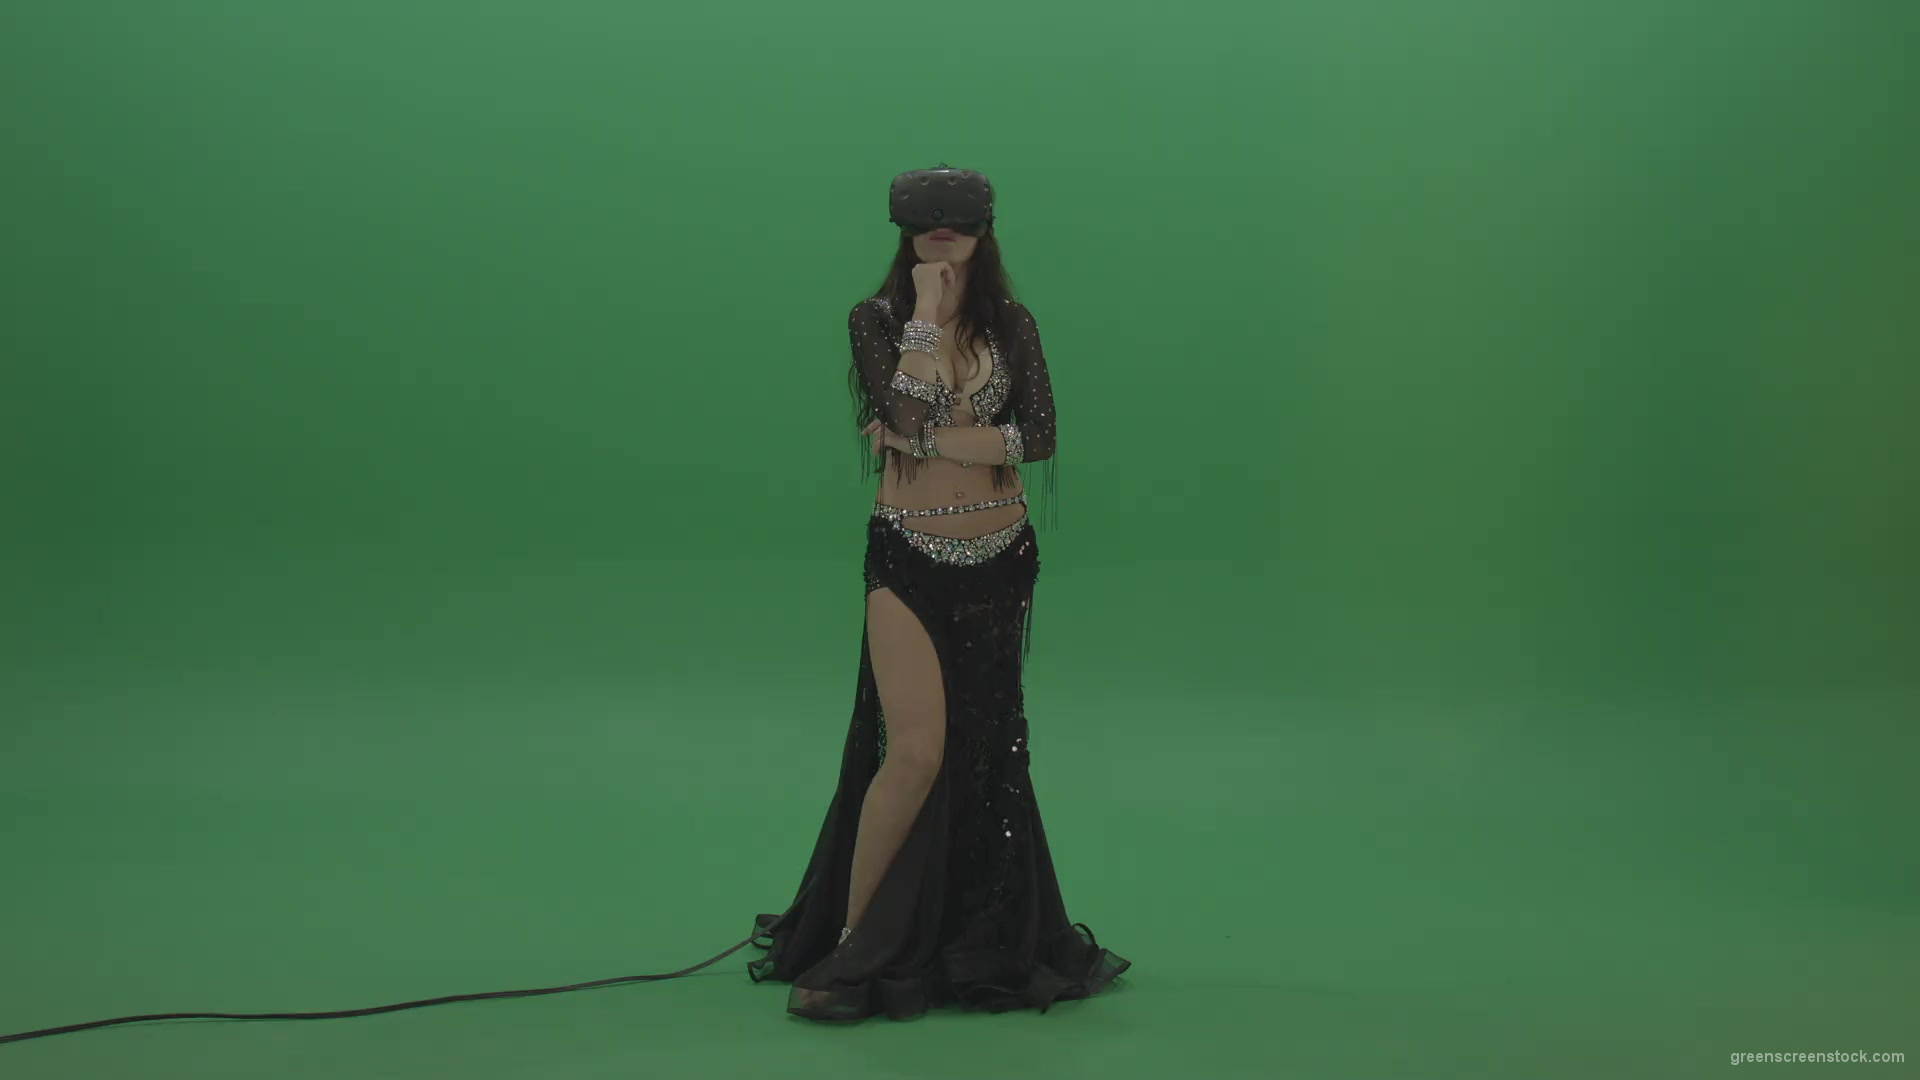 Beautiful-belly-dancer-in-VR-headset-operates-invisible-screen-over-green-screen-background-1920_001 Green Screen Stock